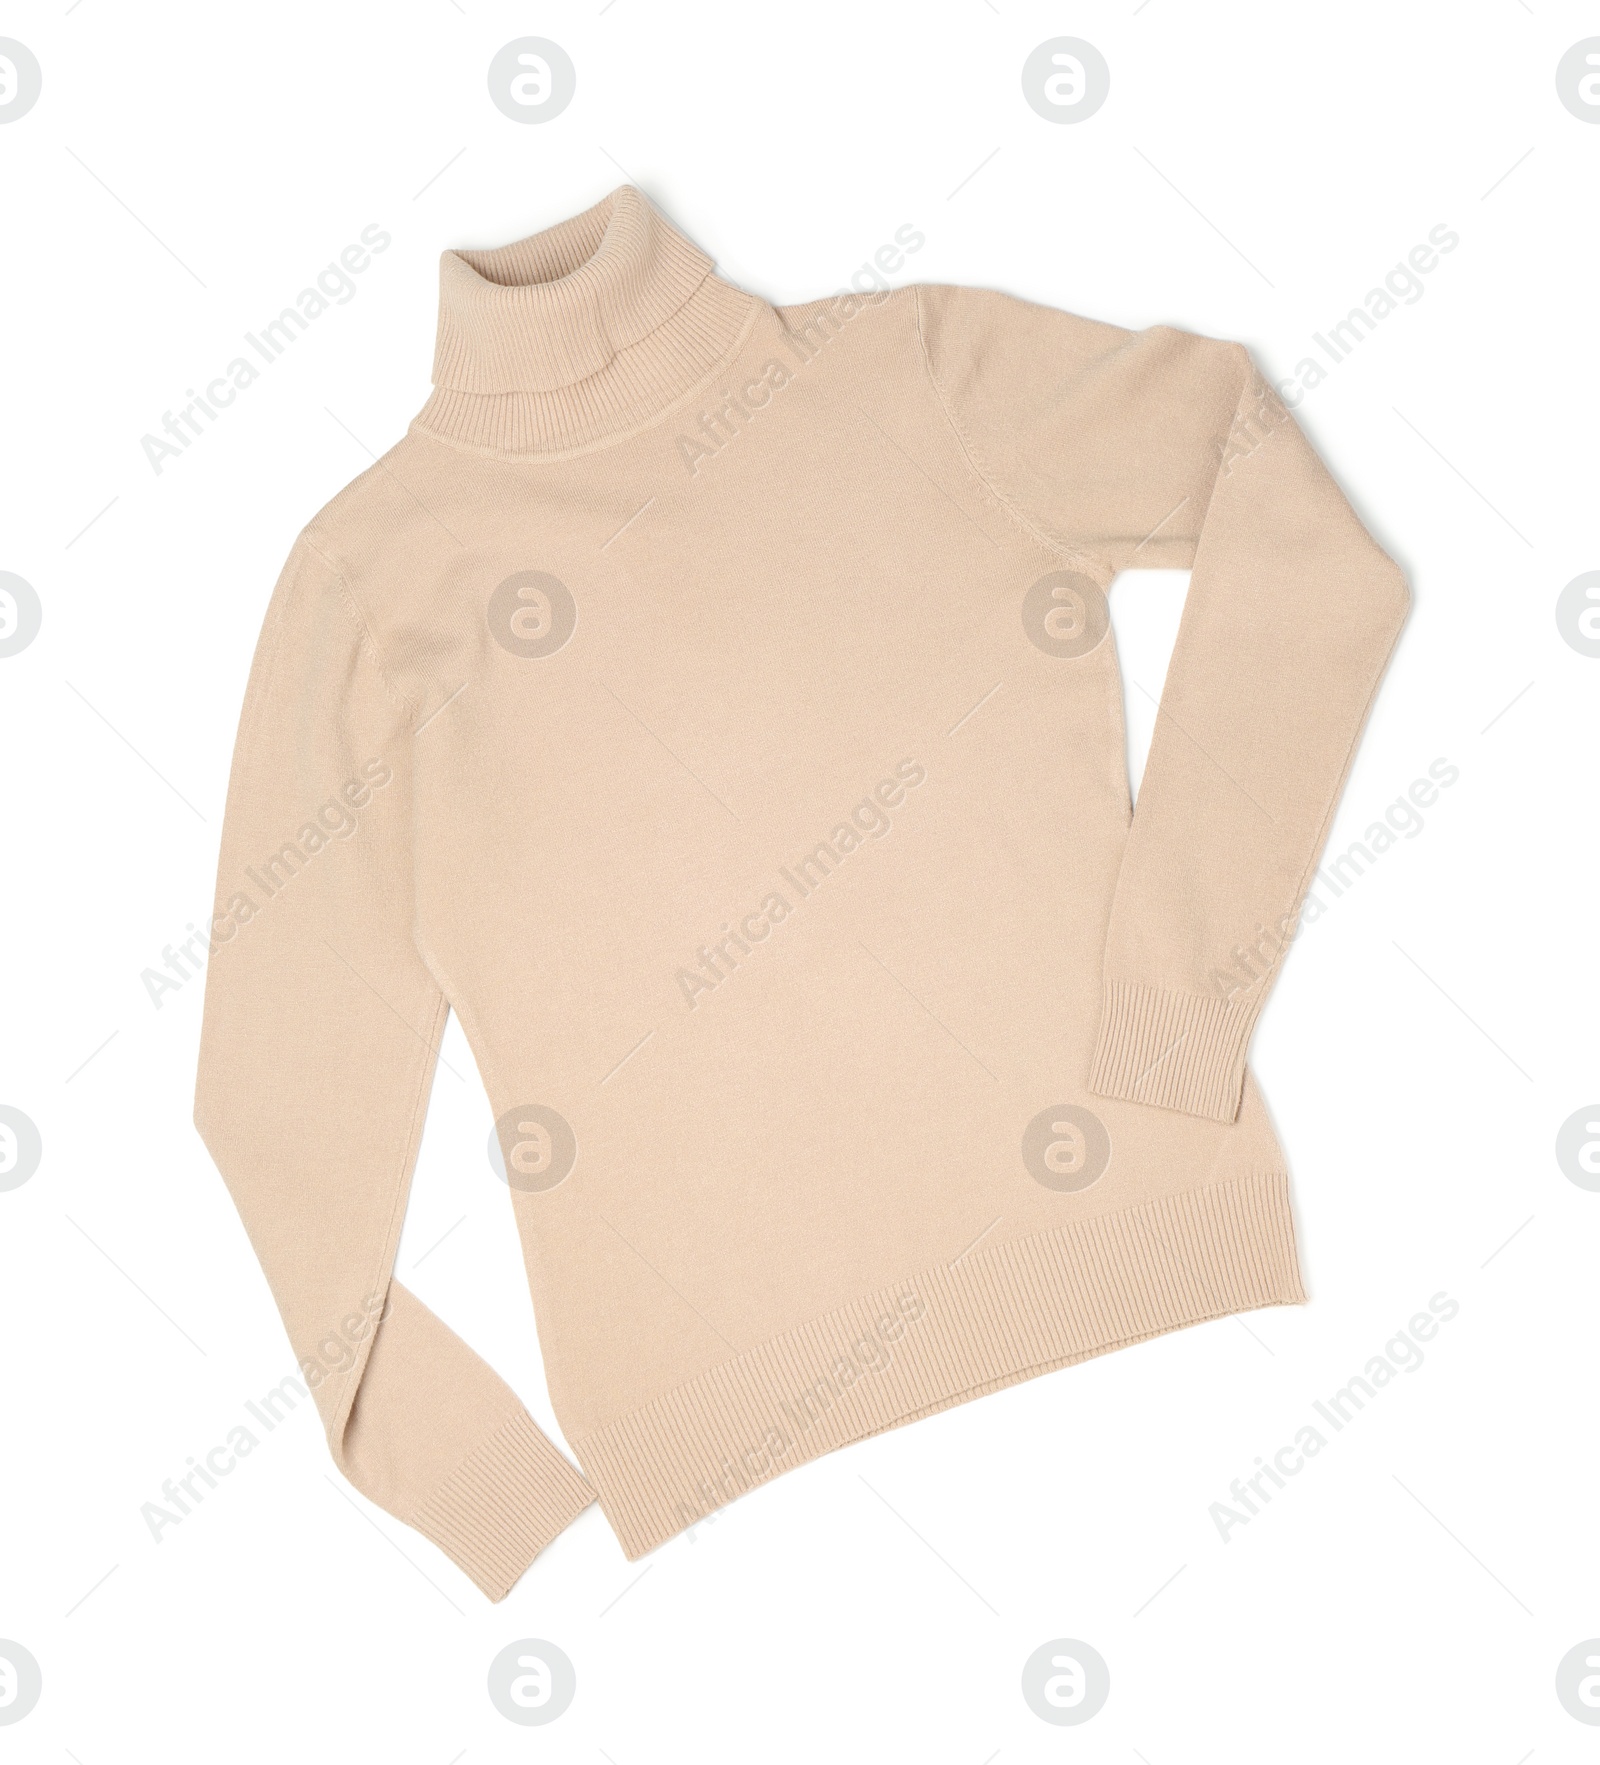 Photo of Beige cashmere sweater isolated on white, top view